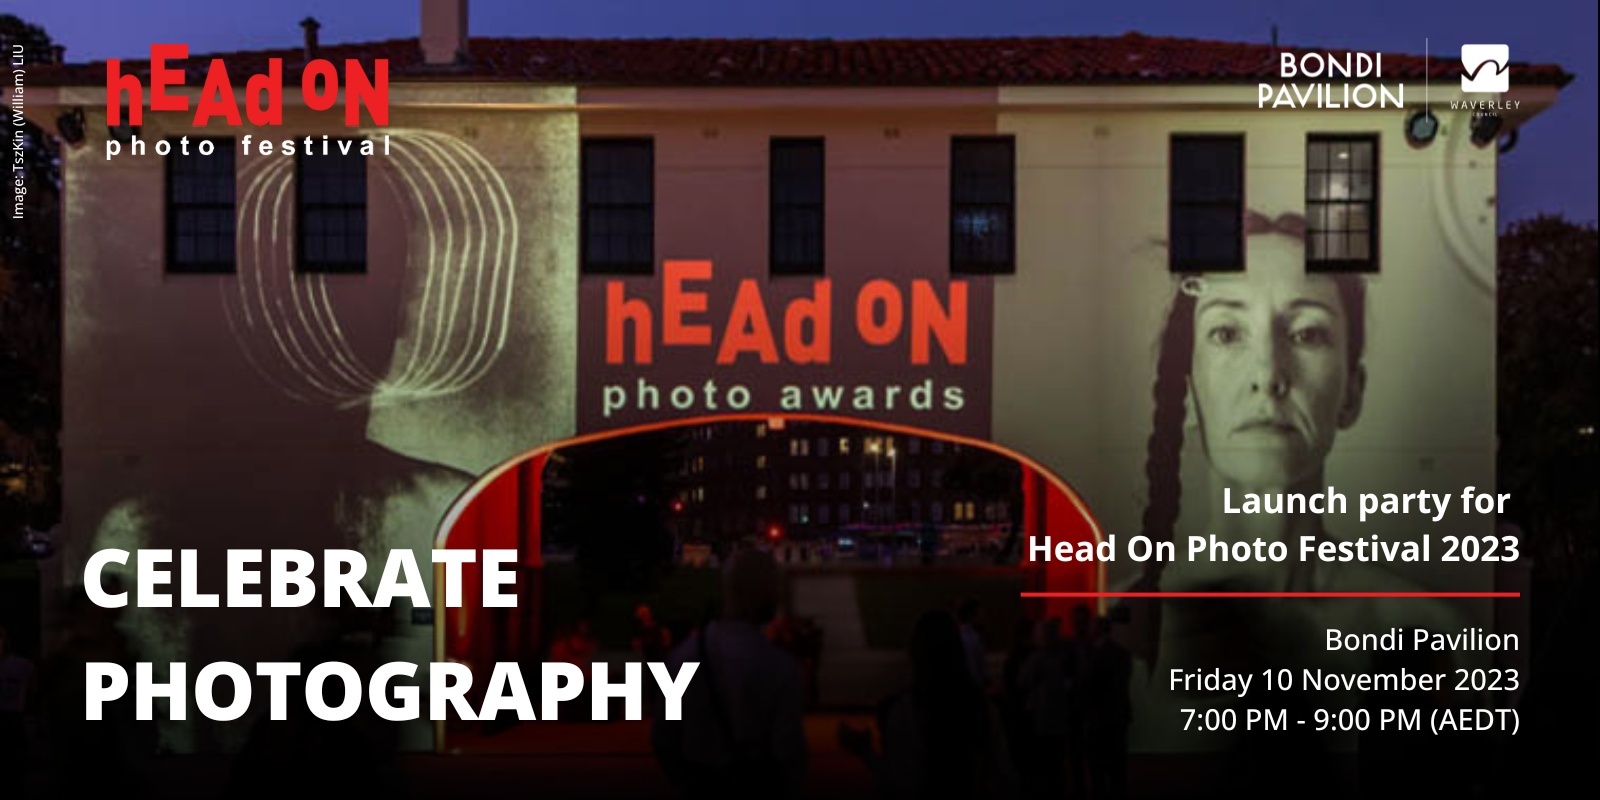 Banner image for Head On Photo Festival 2023 Launch party, world premiere of the Head On Photo Awards and announcement of winners